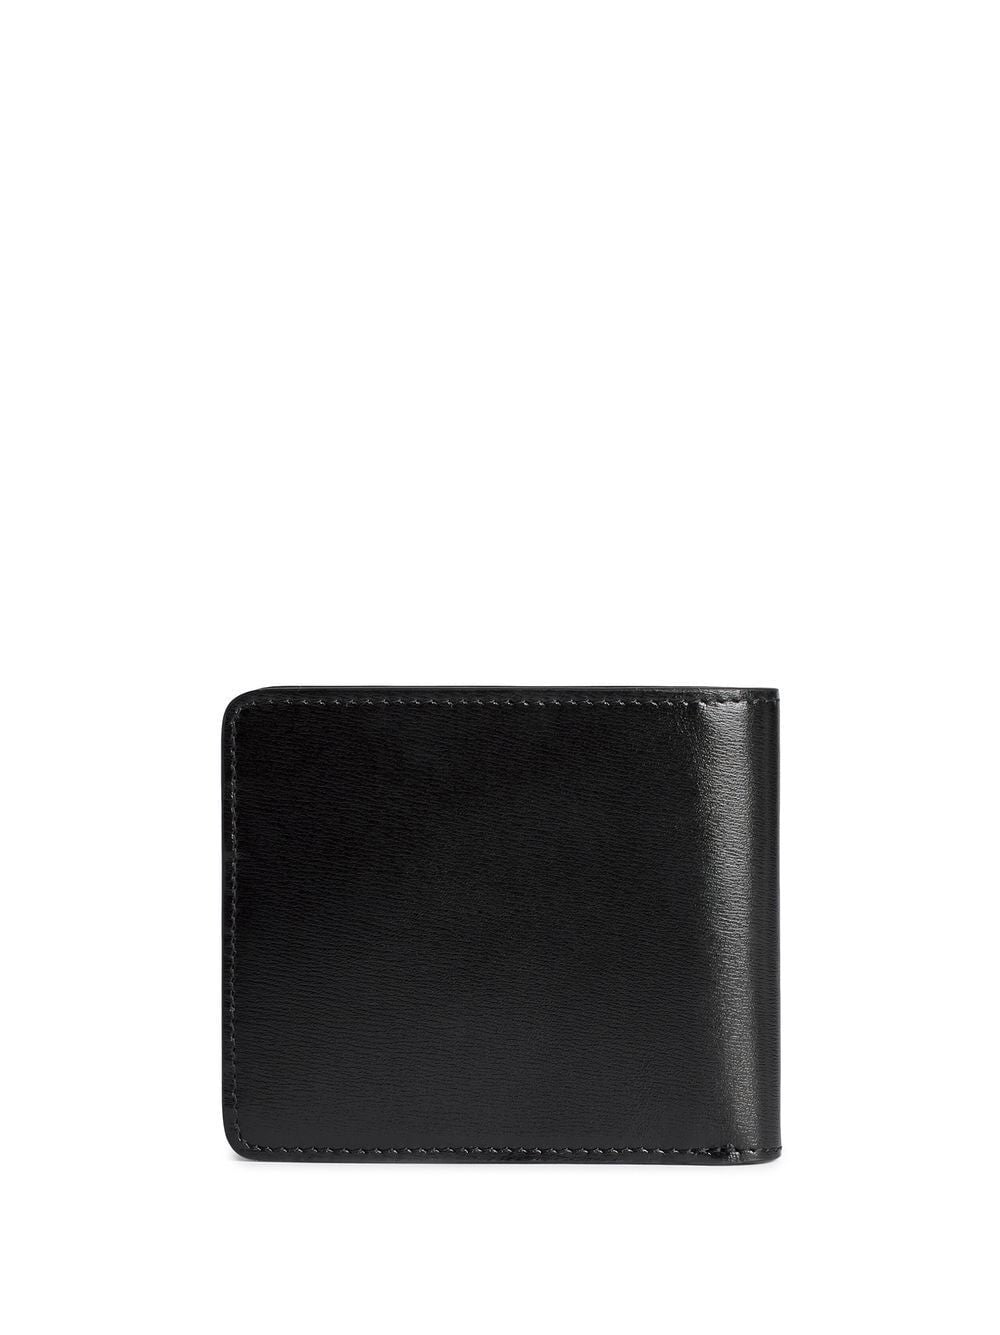 Adc Folded Wallet